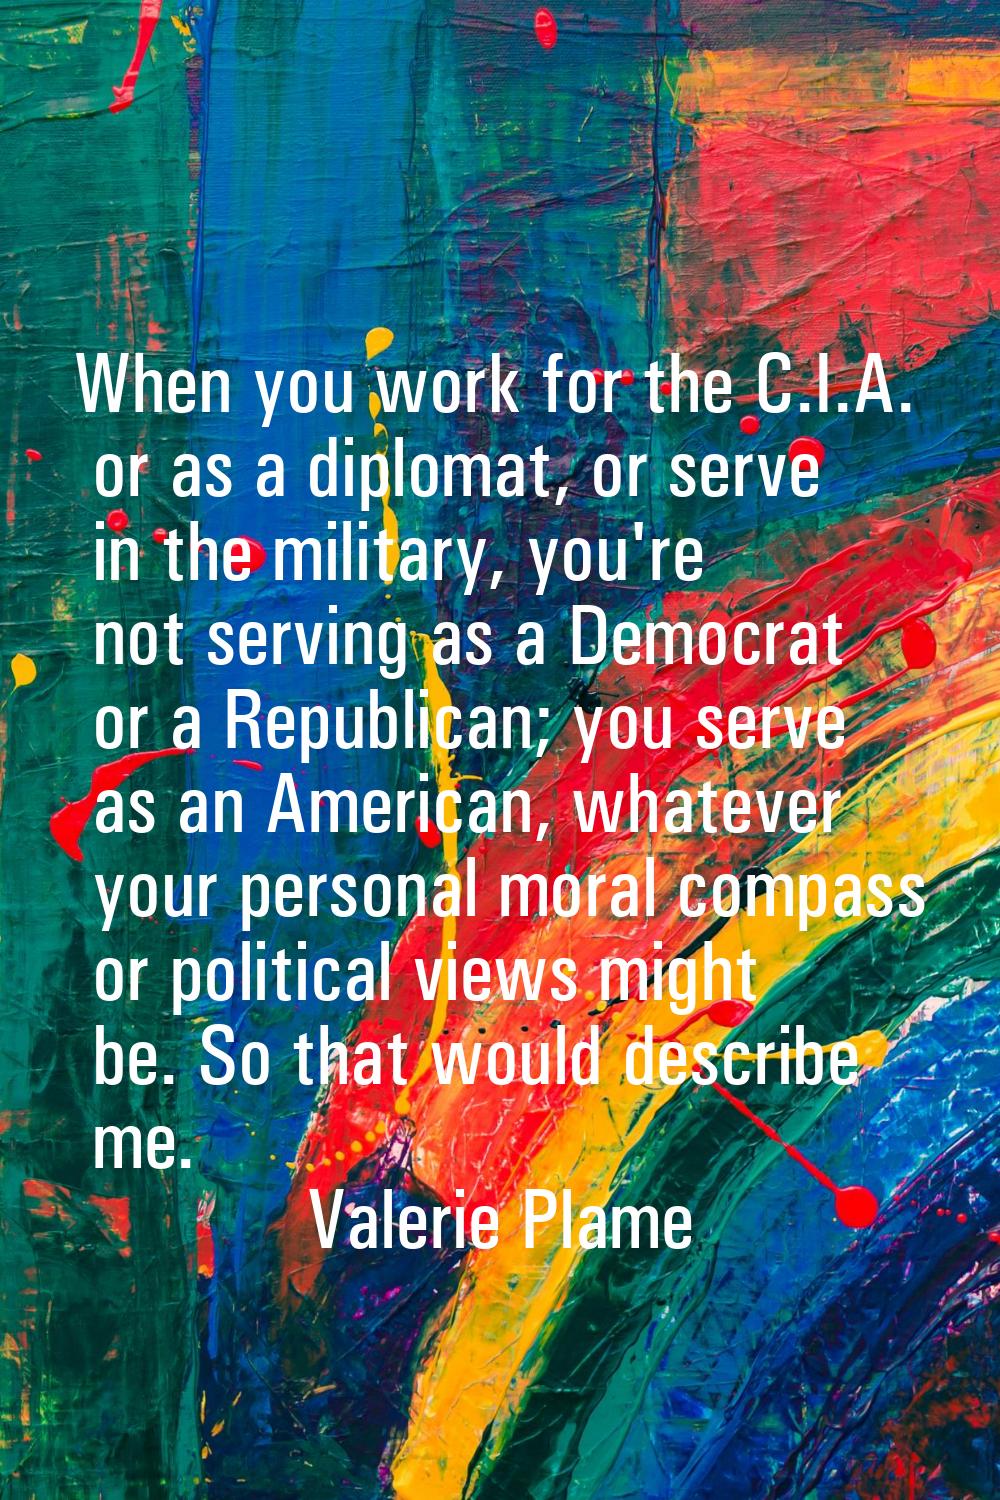 When you work for the C.I.A. or as a diplomat, or serve in the military, you're not serving as a De